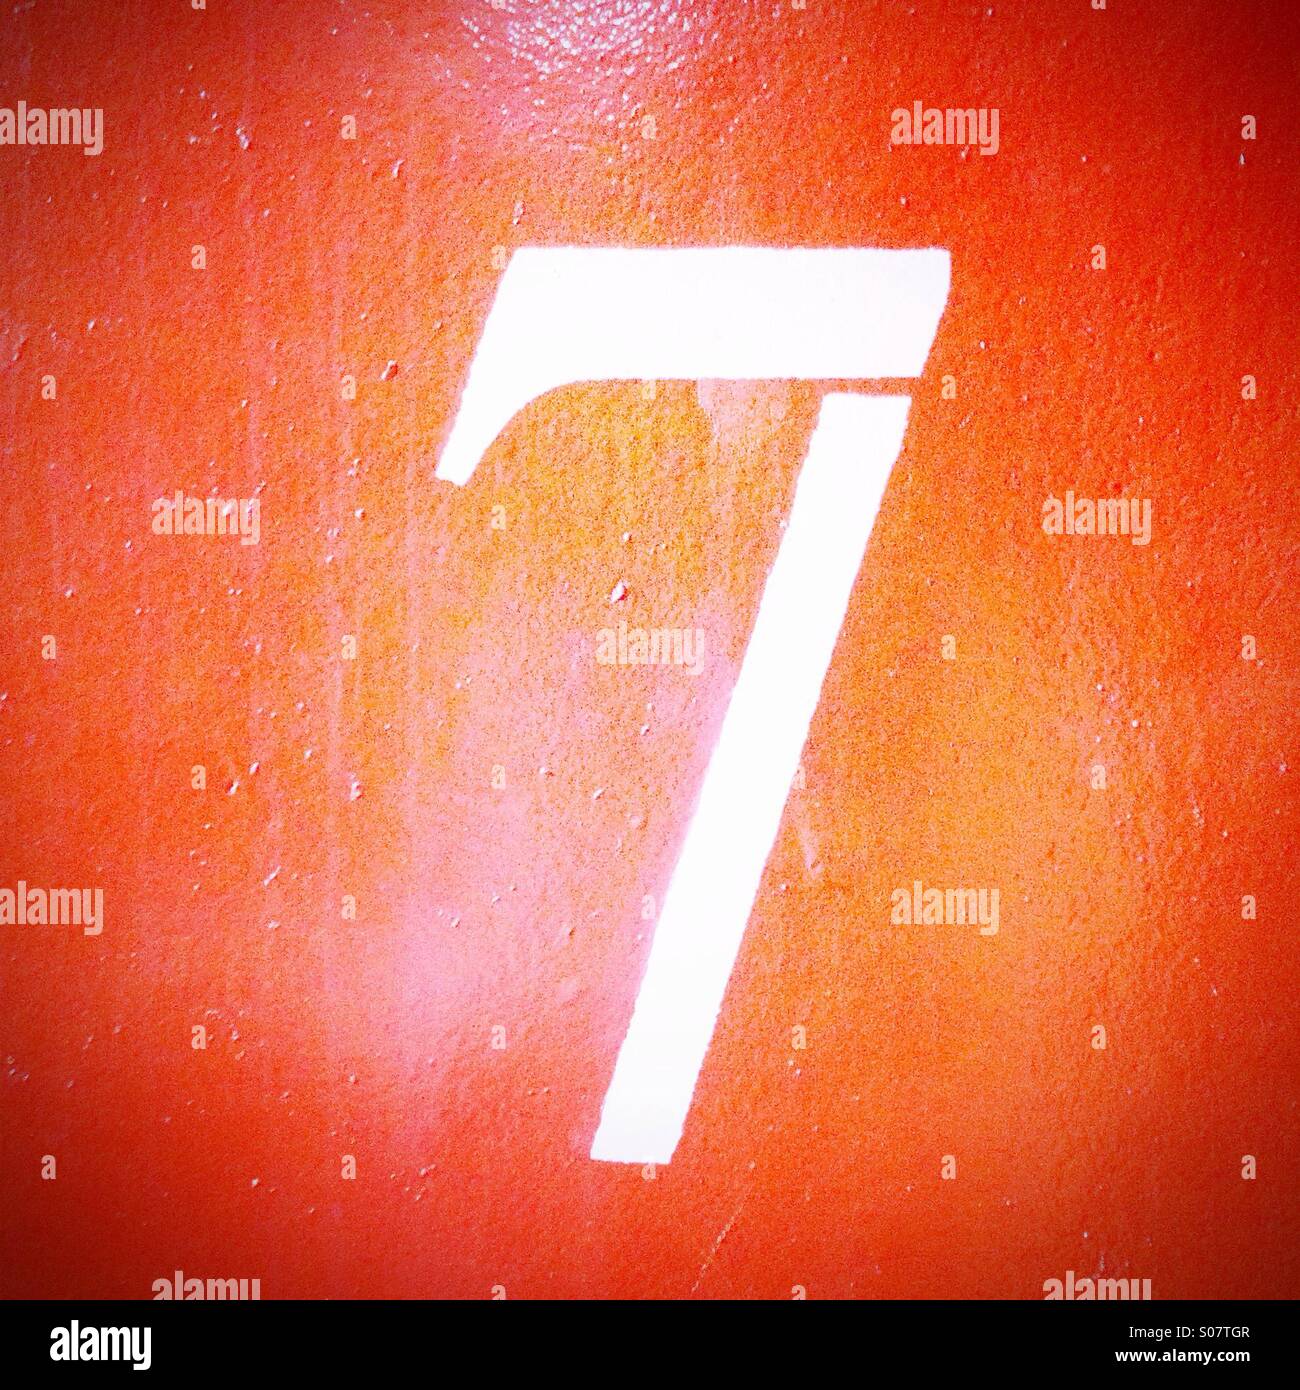 Number 7 painted in white on orange wall Stock Photo